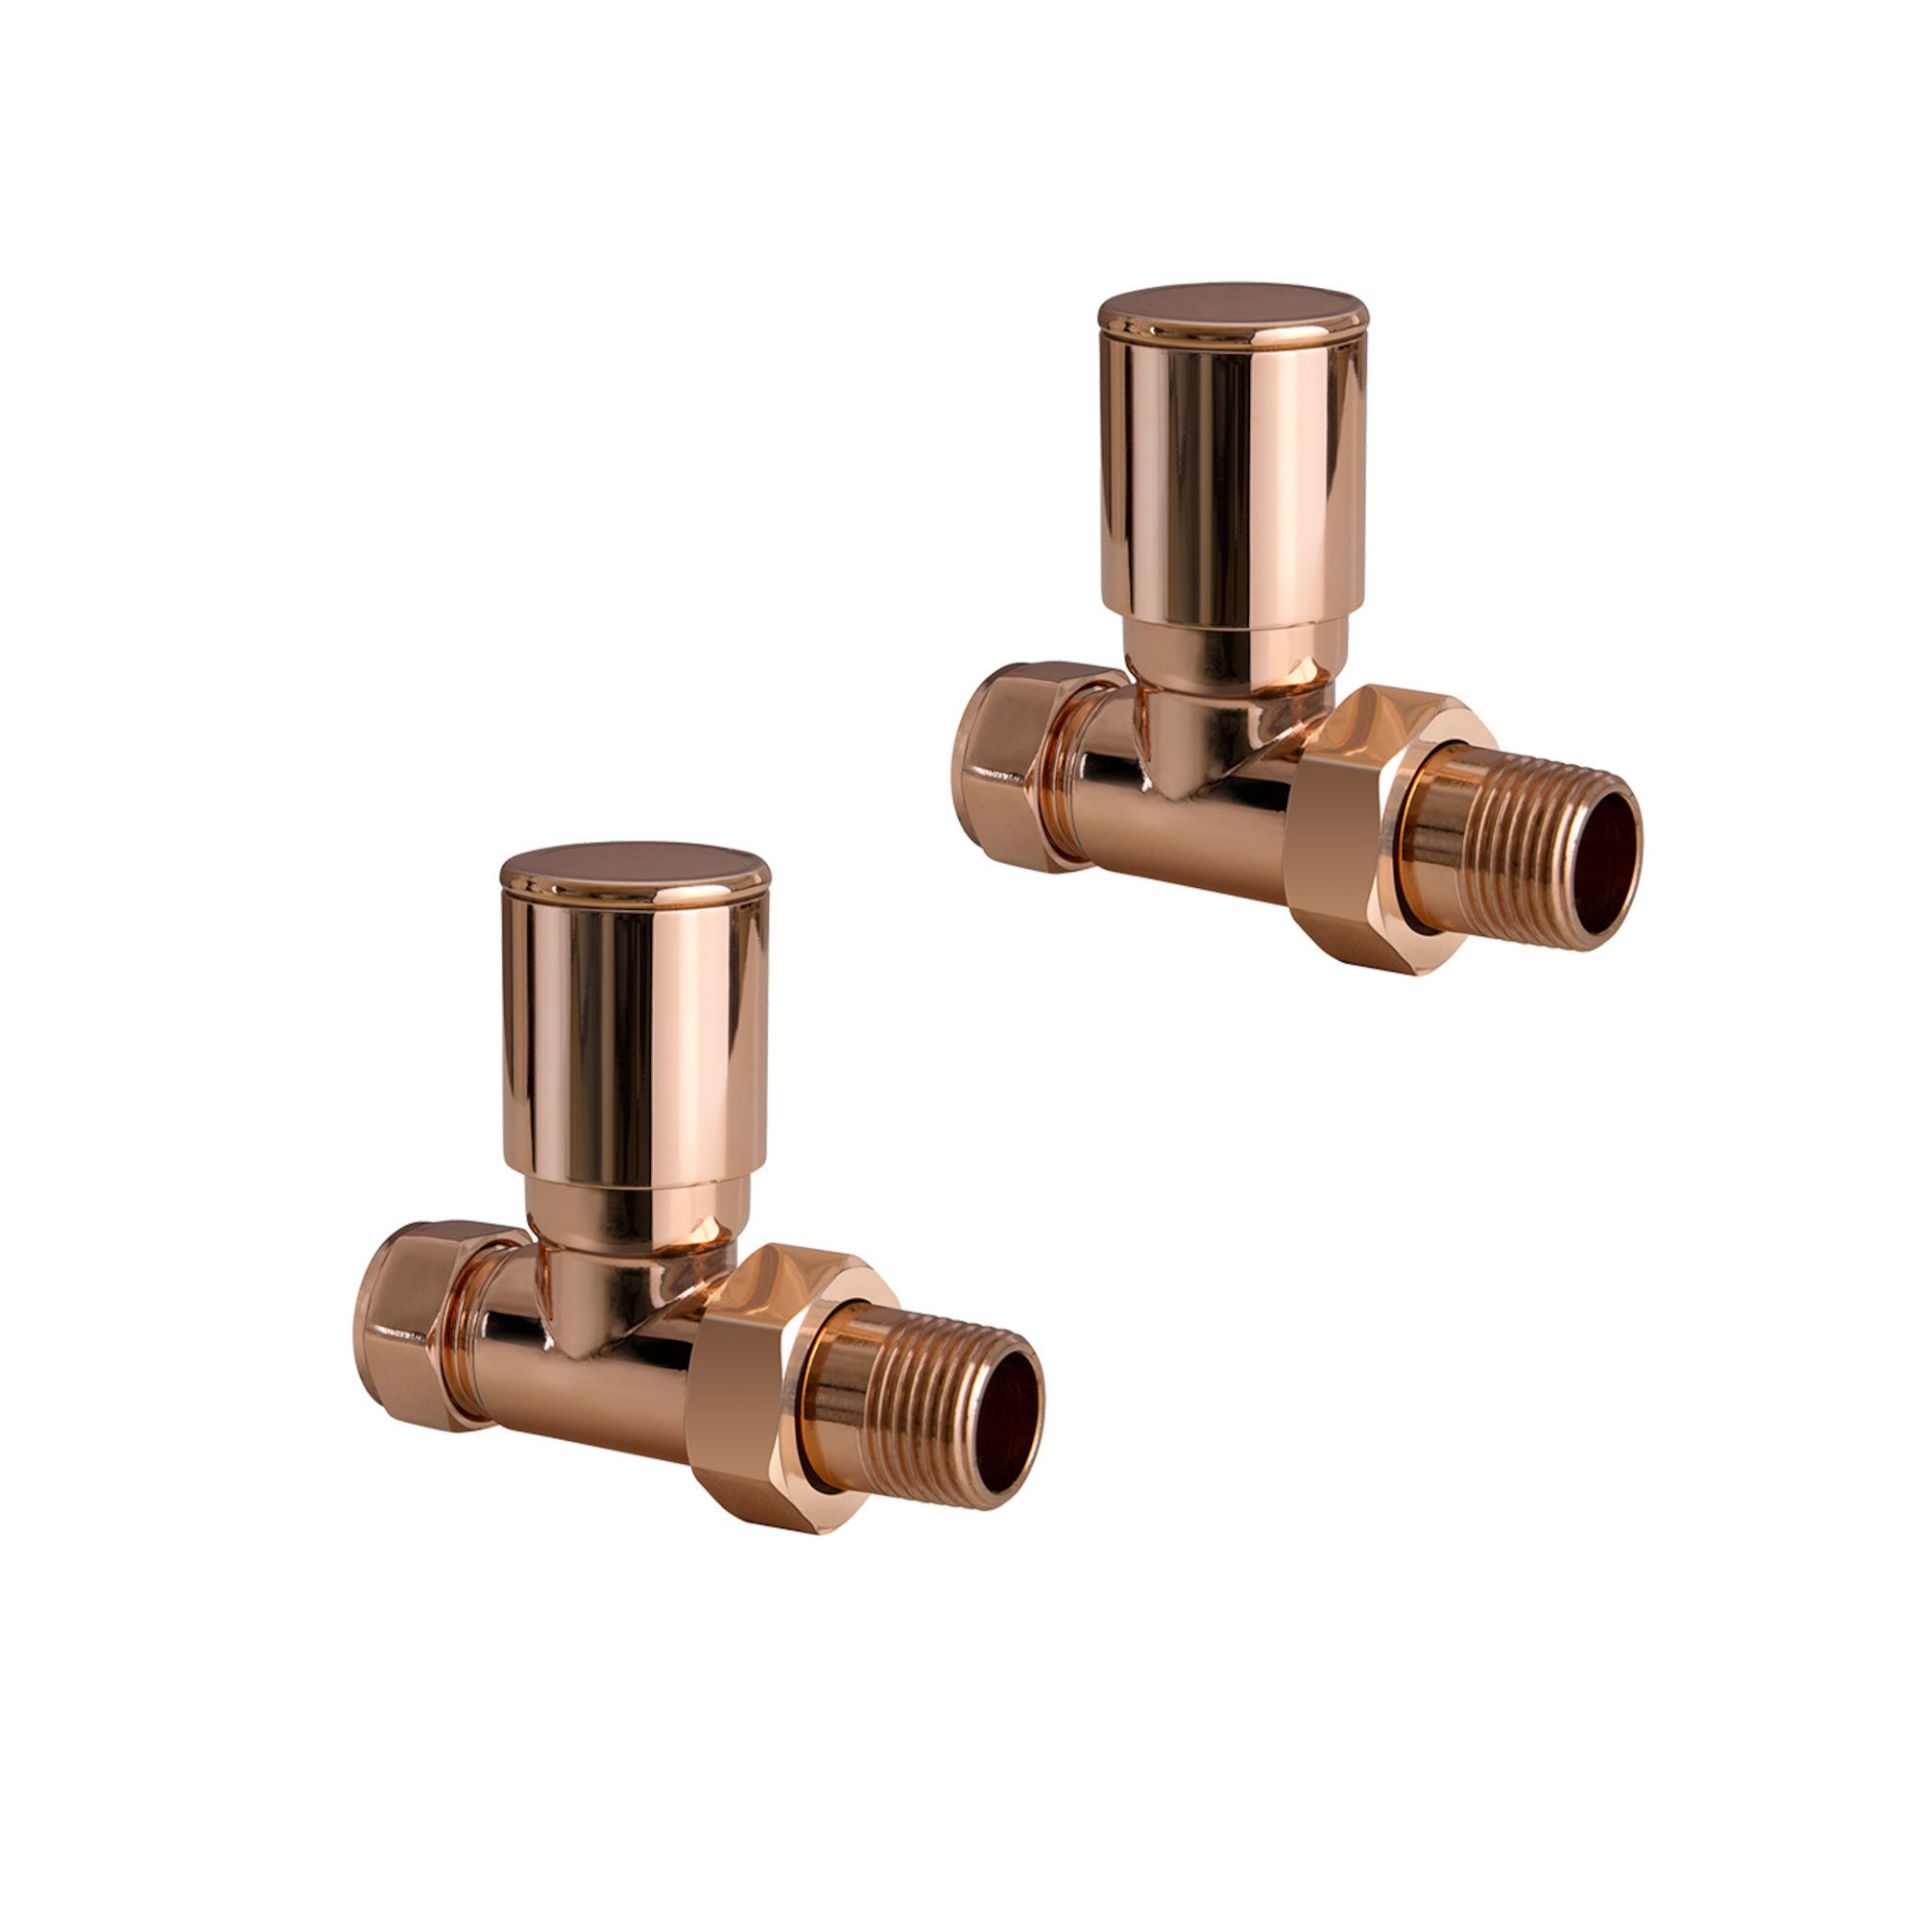 (HP88) Standard Connection Straight Radiator Valve in Copper - 15mm Manufactured from solid brass